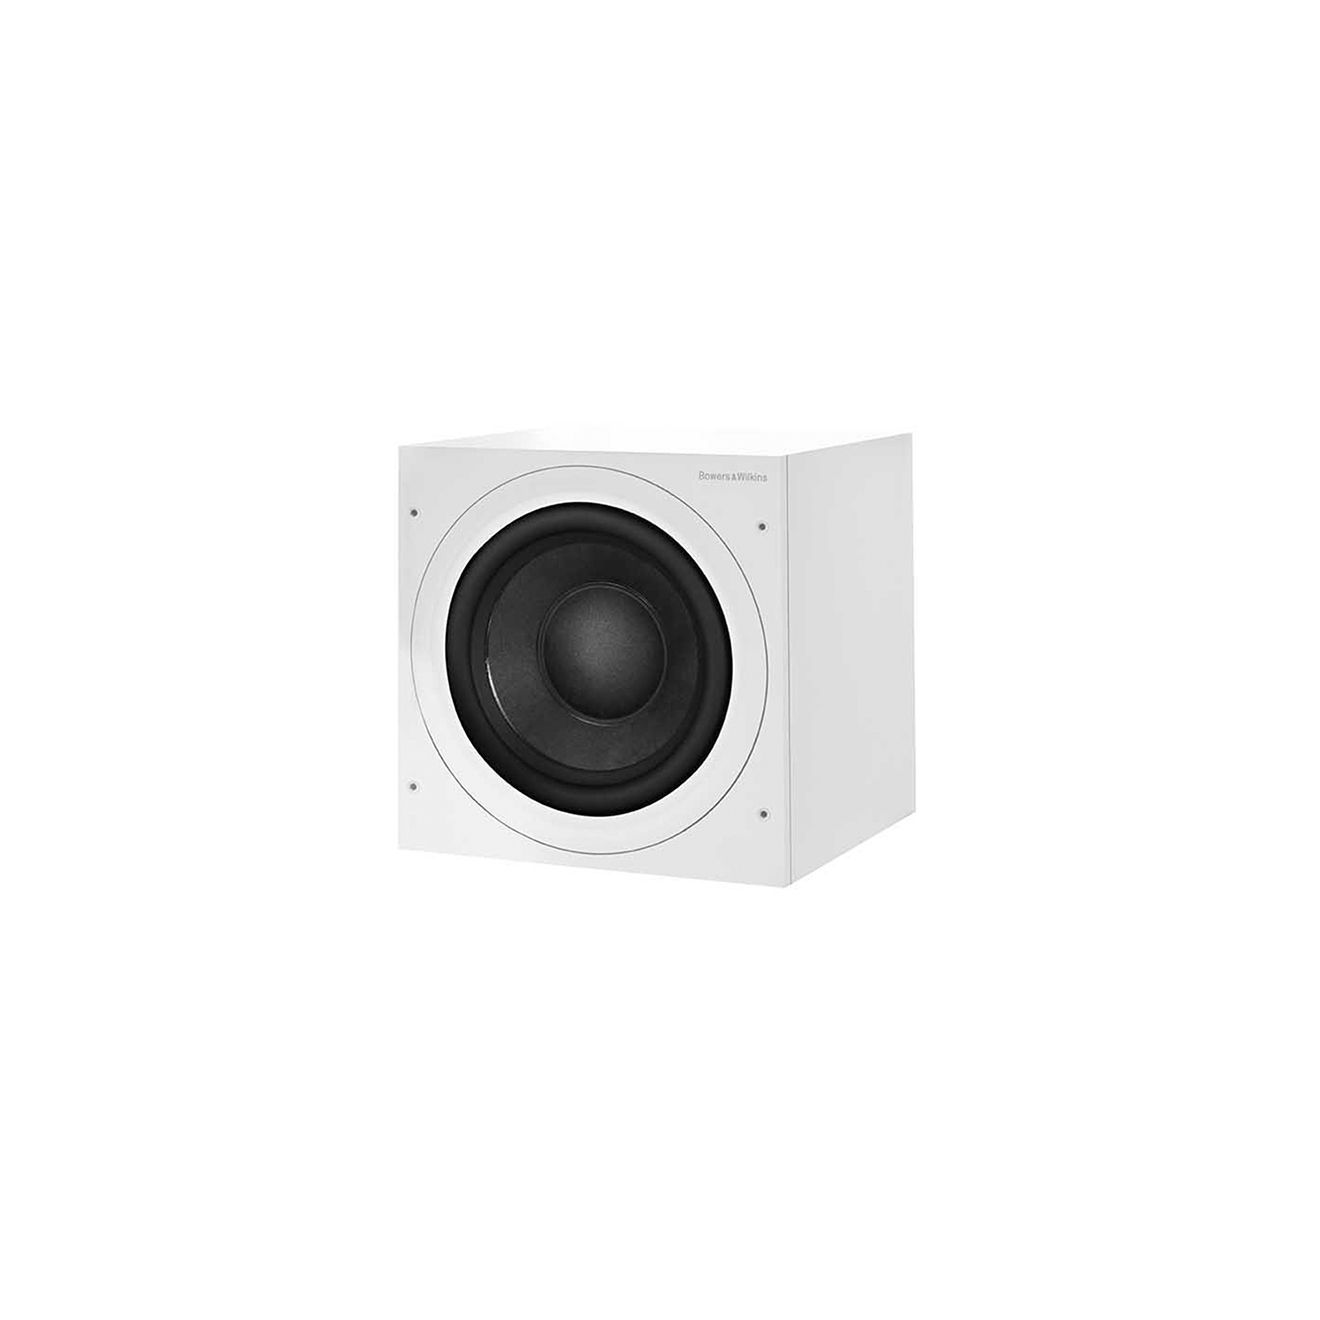 Bowers & Wilkins ASW610 Subwoofer